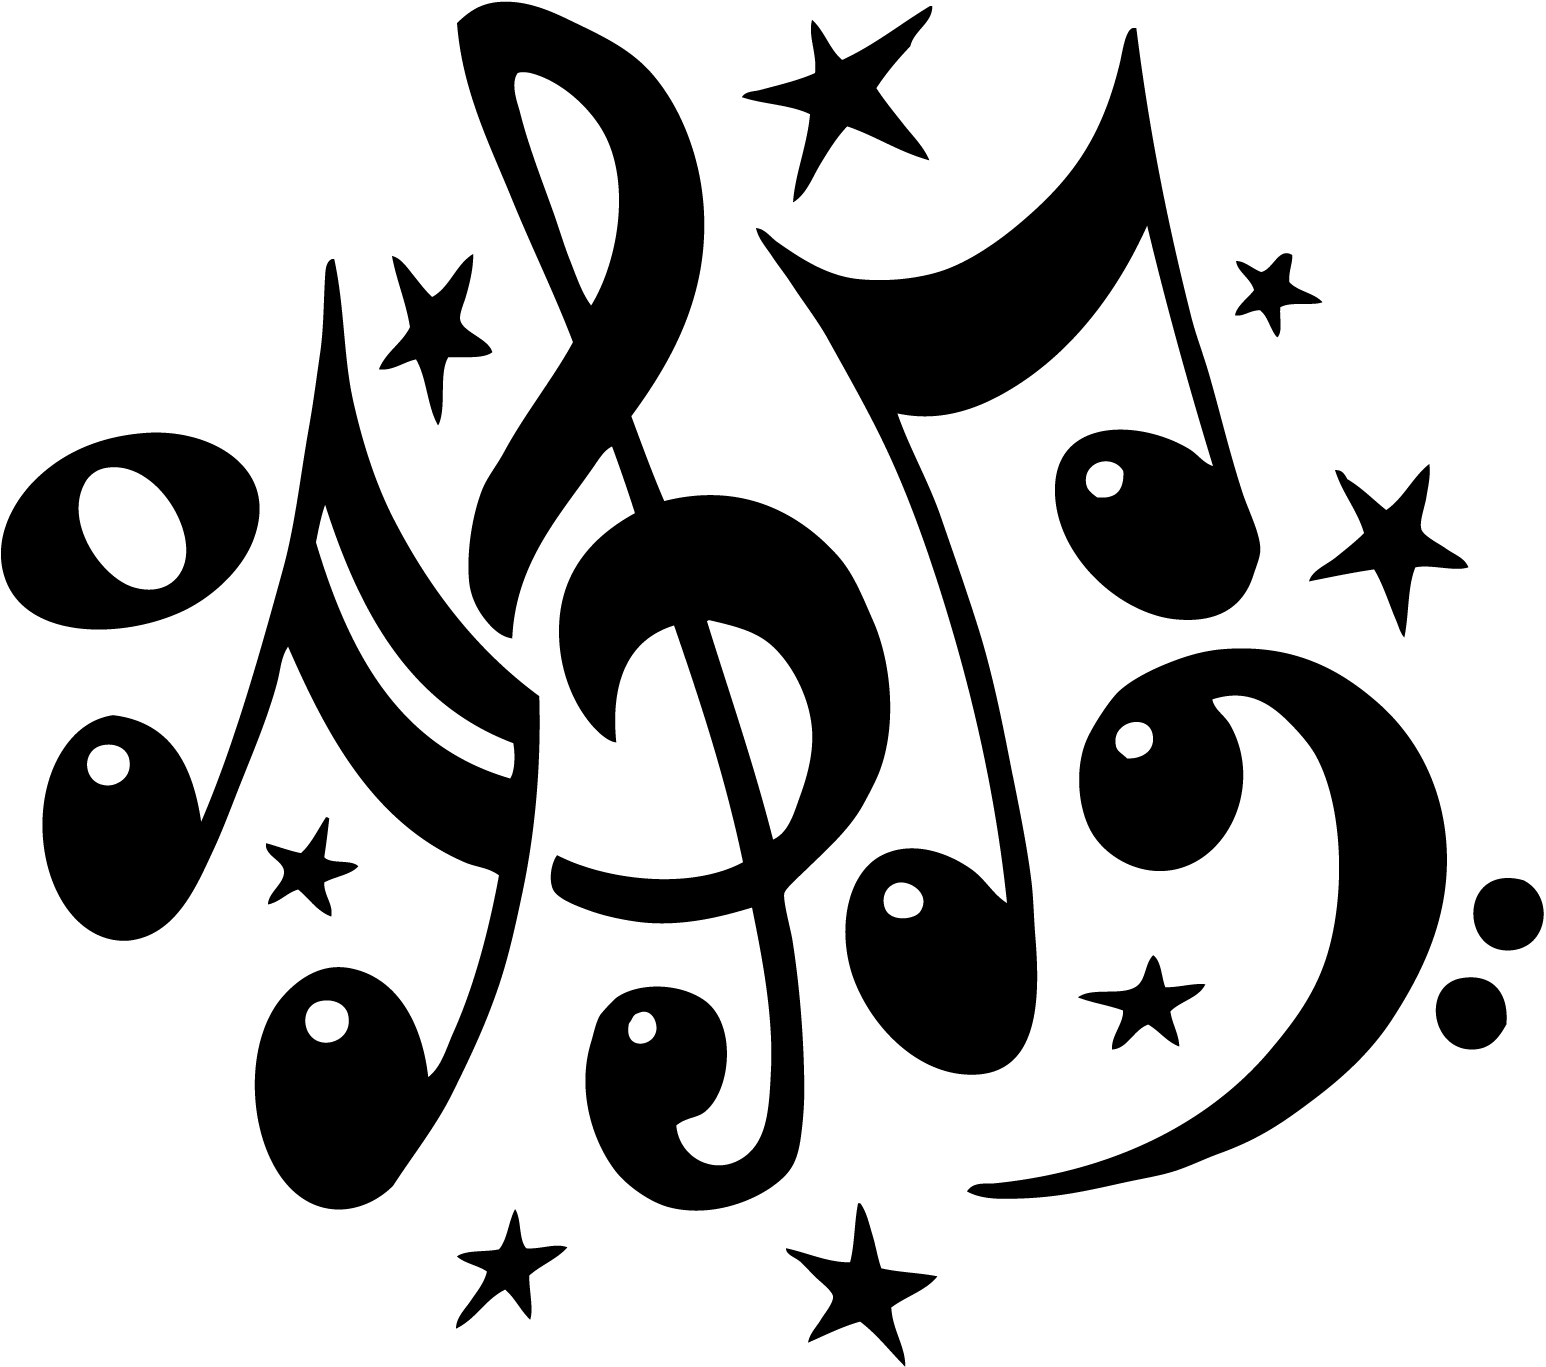 Musical Notes | Free Images at Clker.com - vector clip art online